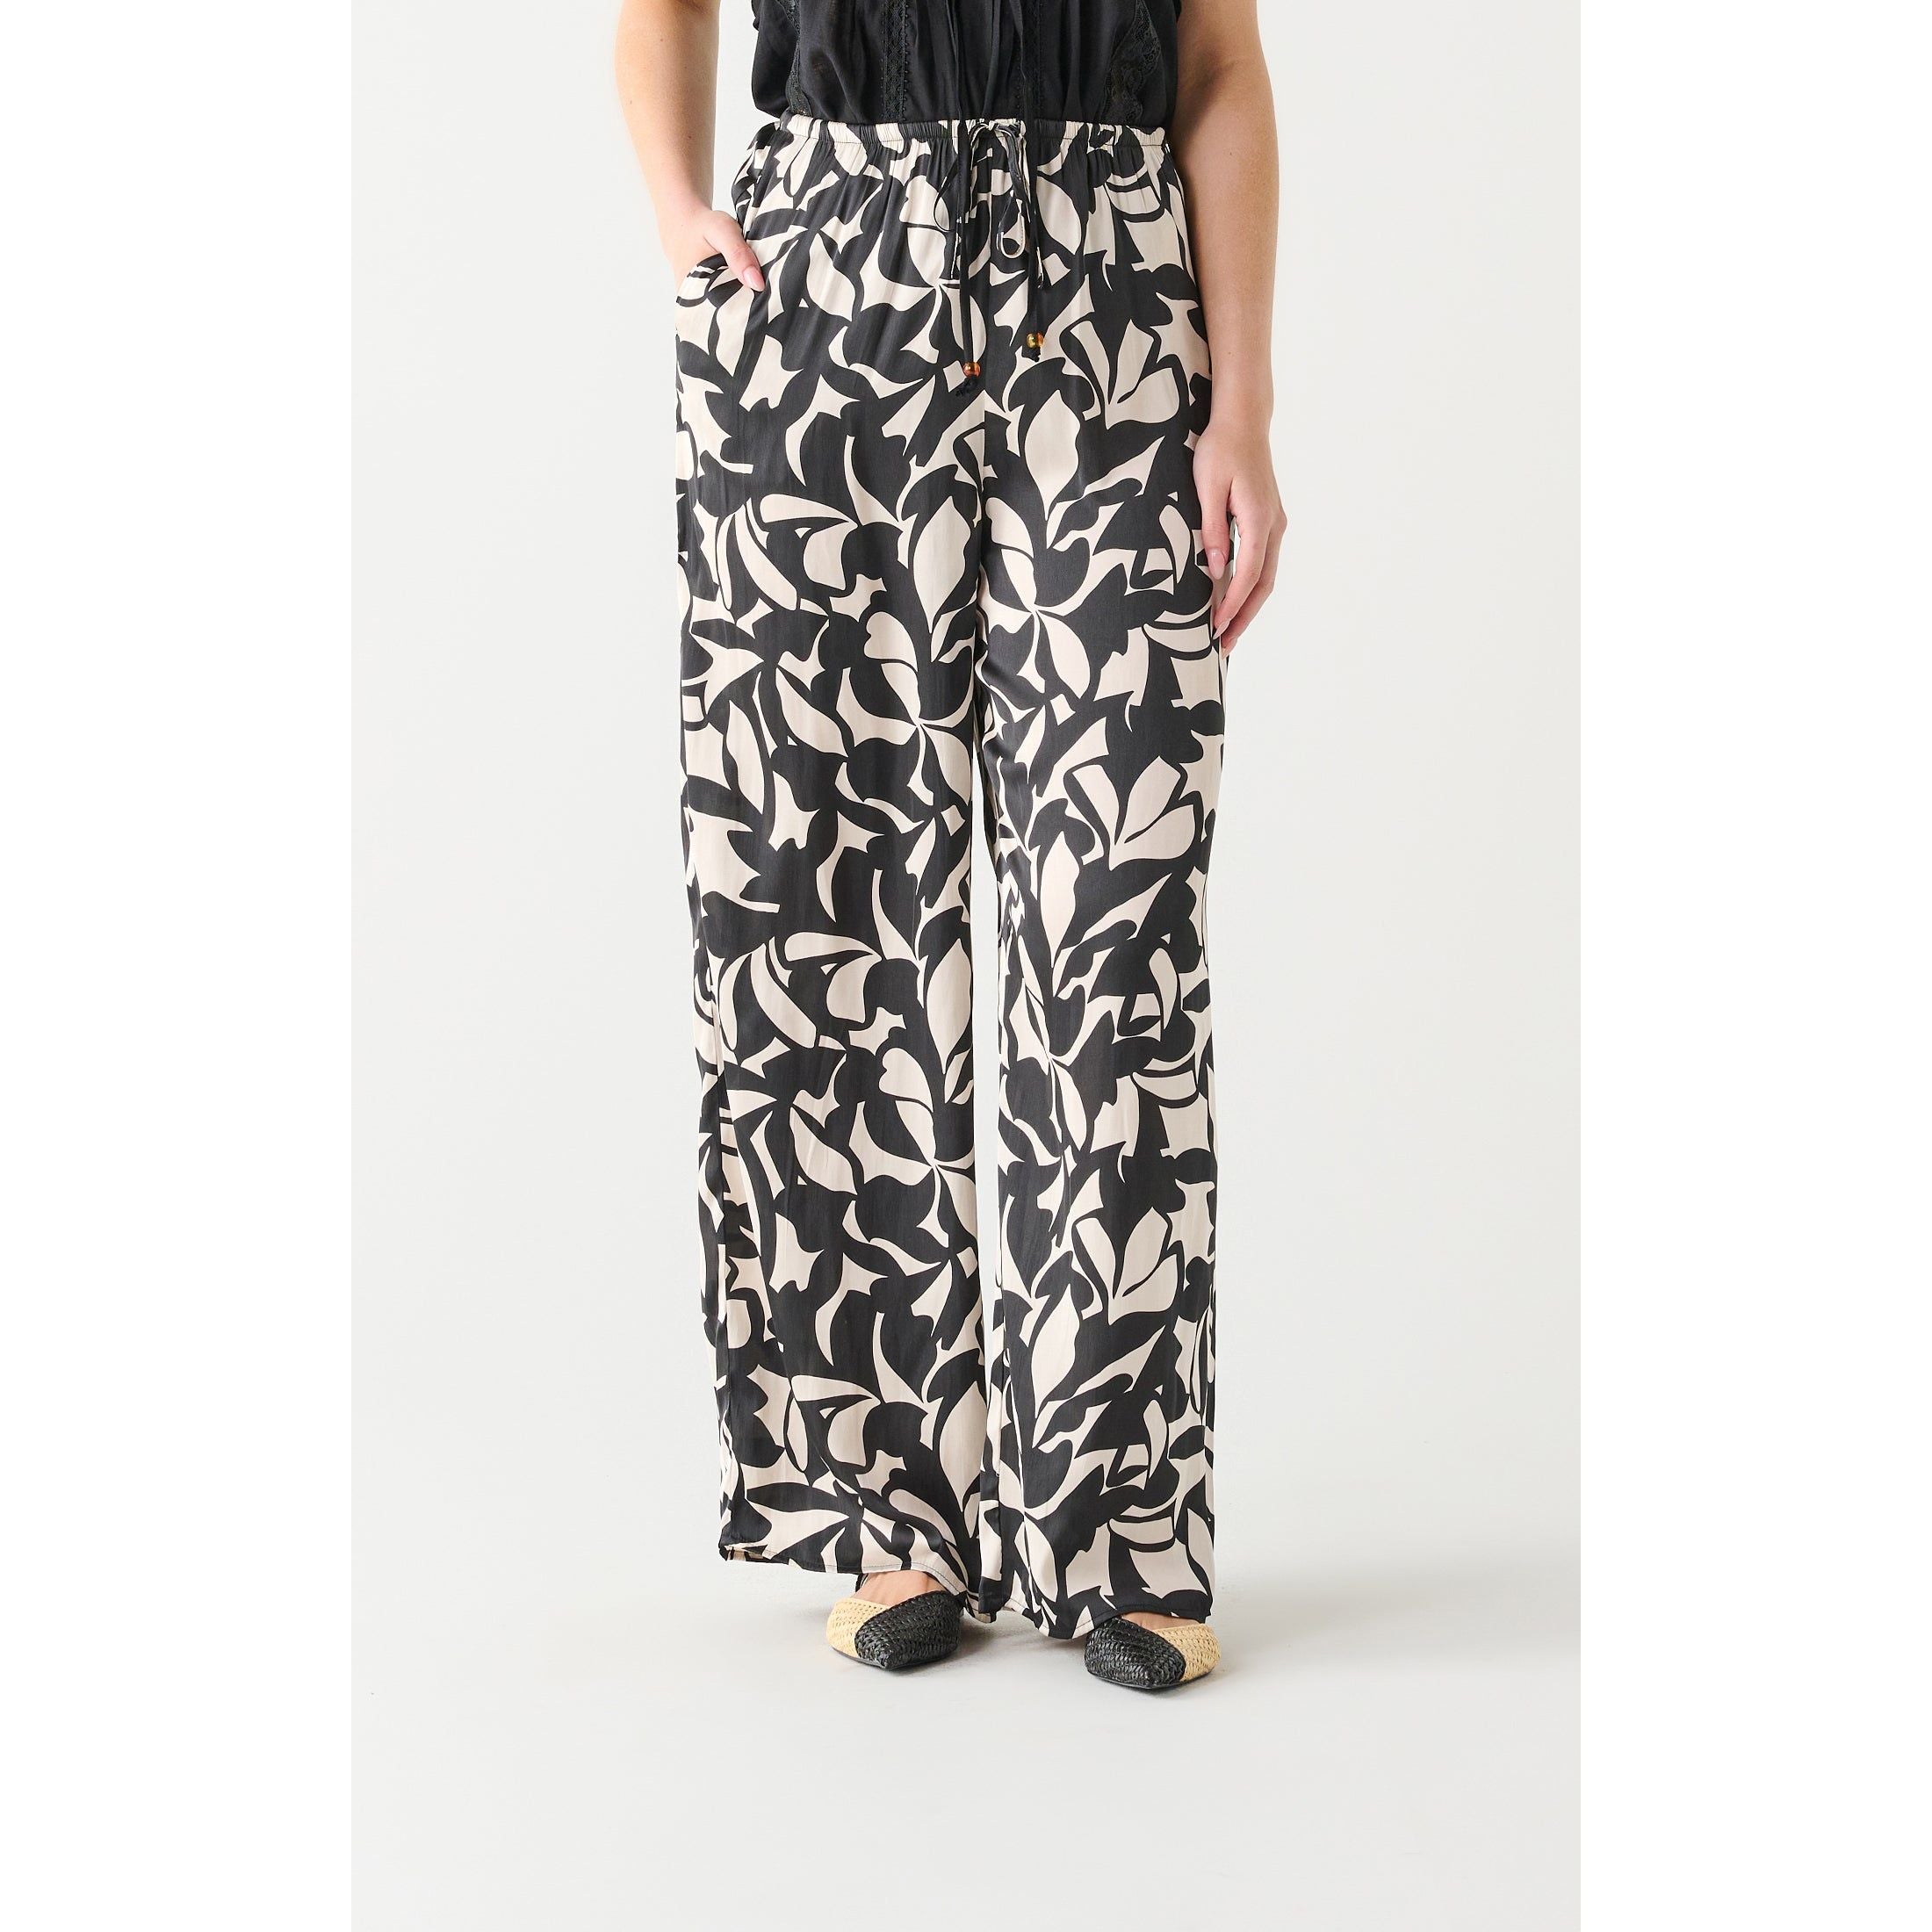 Dex - High Waisted Printed Pant in Black/White Floral